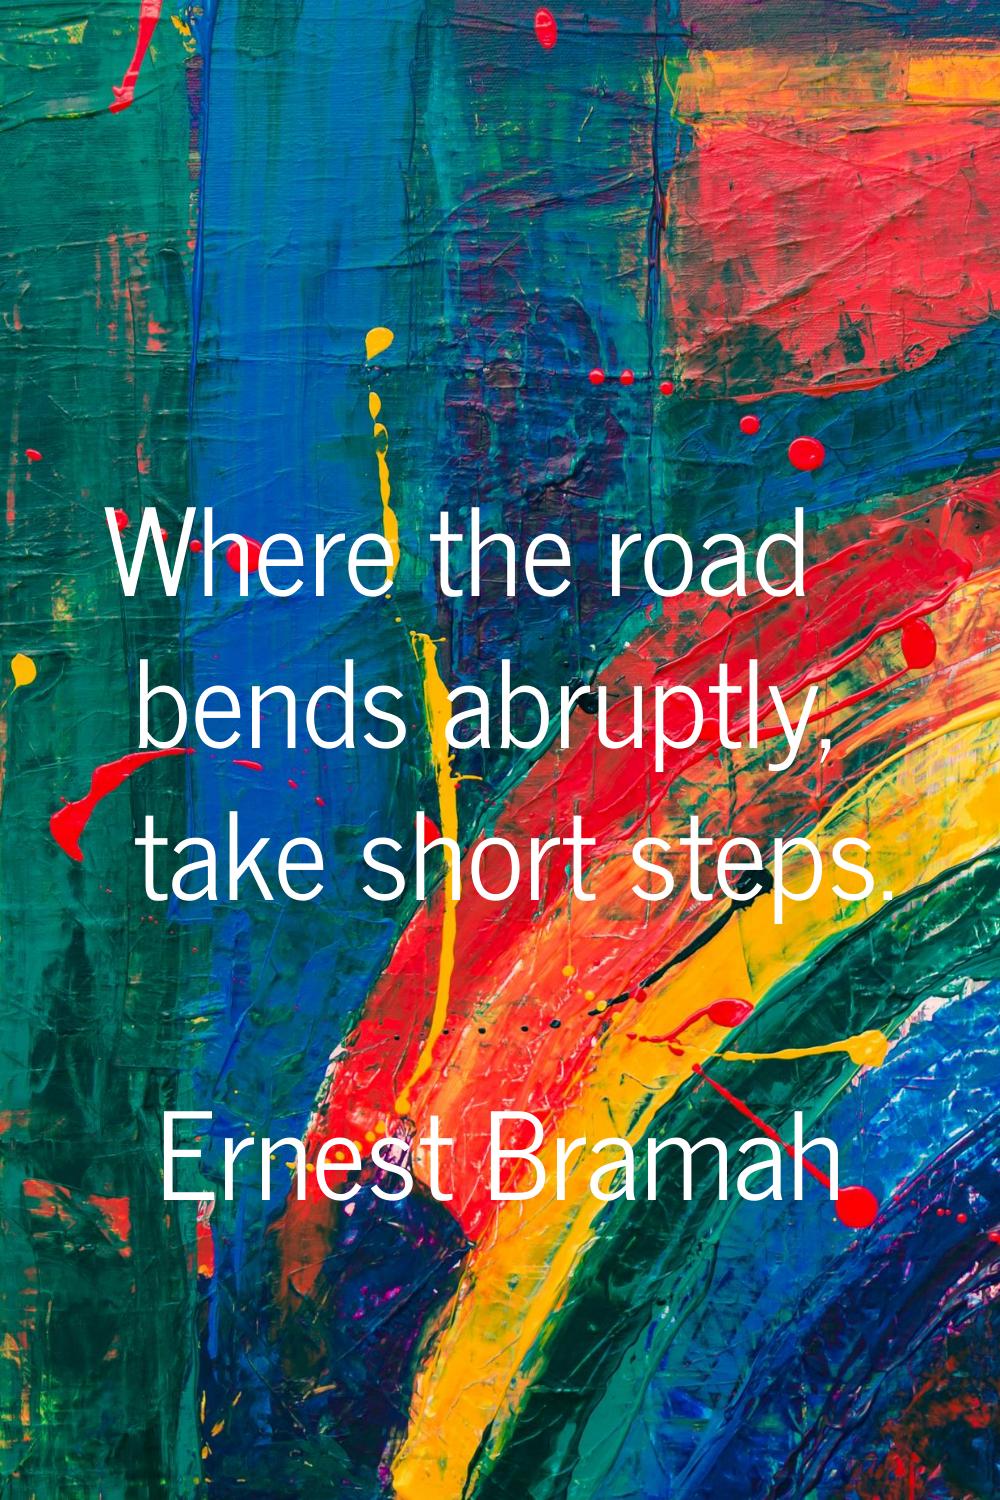 Where the road bends abruptly, take short steps.